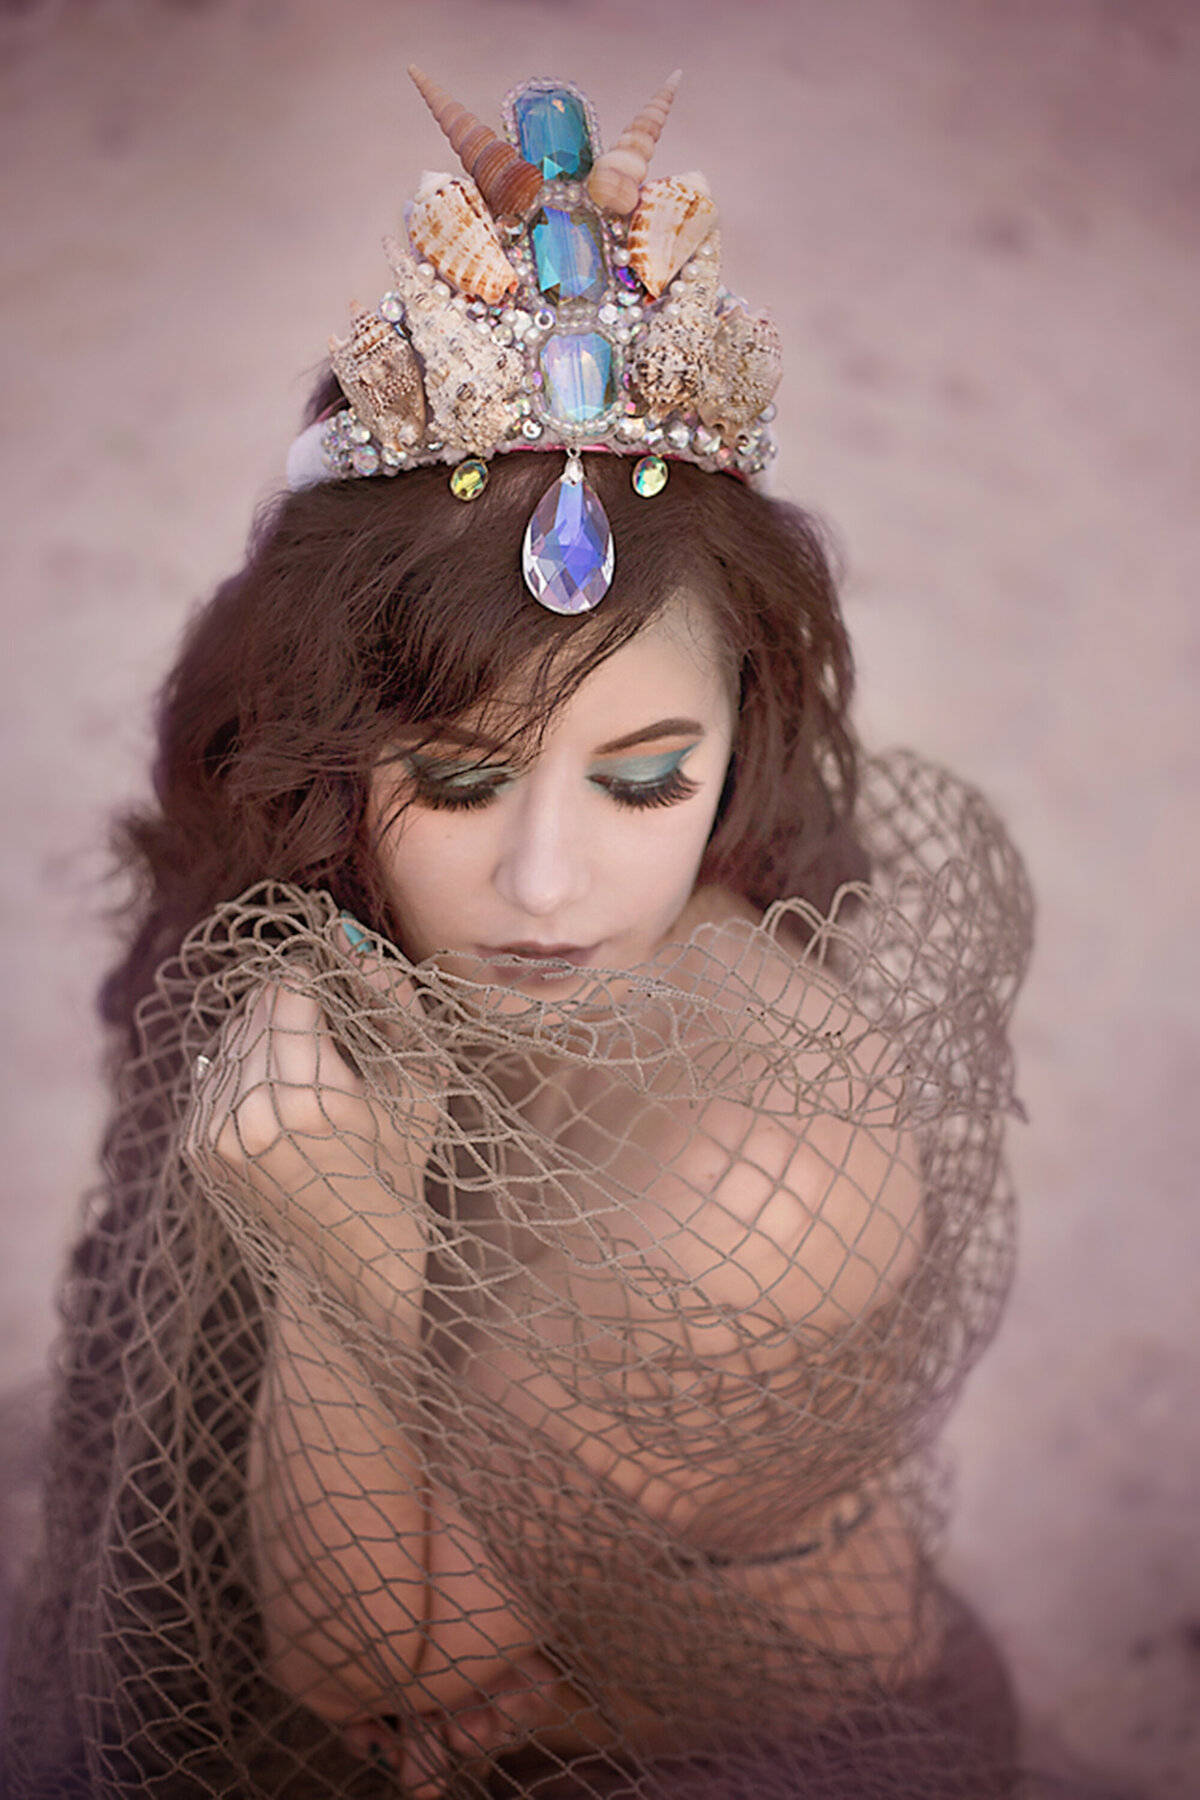 Adult woman with long brown hair and mermaid crown with shells and jewels.  Her eyes are closed and she is wearing green eyeshadow and thick eyelashes.  The is wrapped in a fishing net.